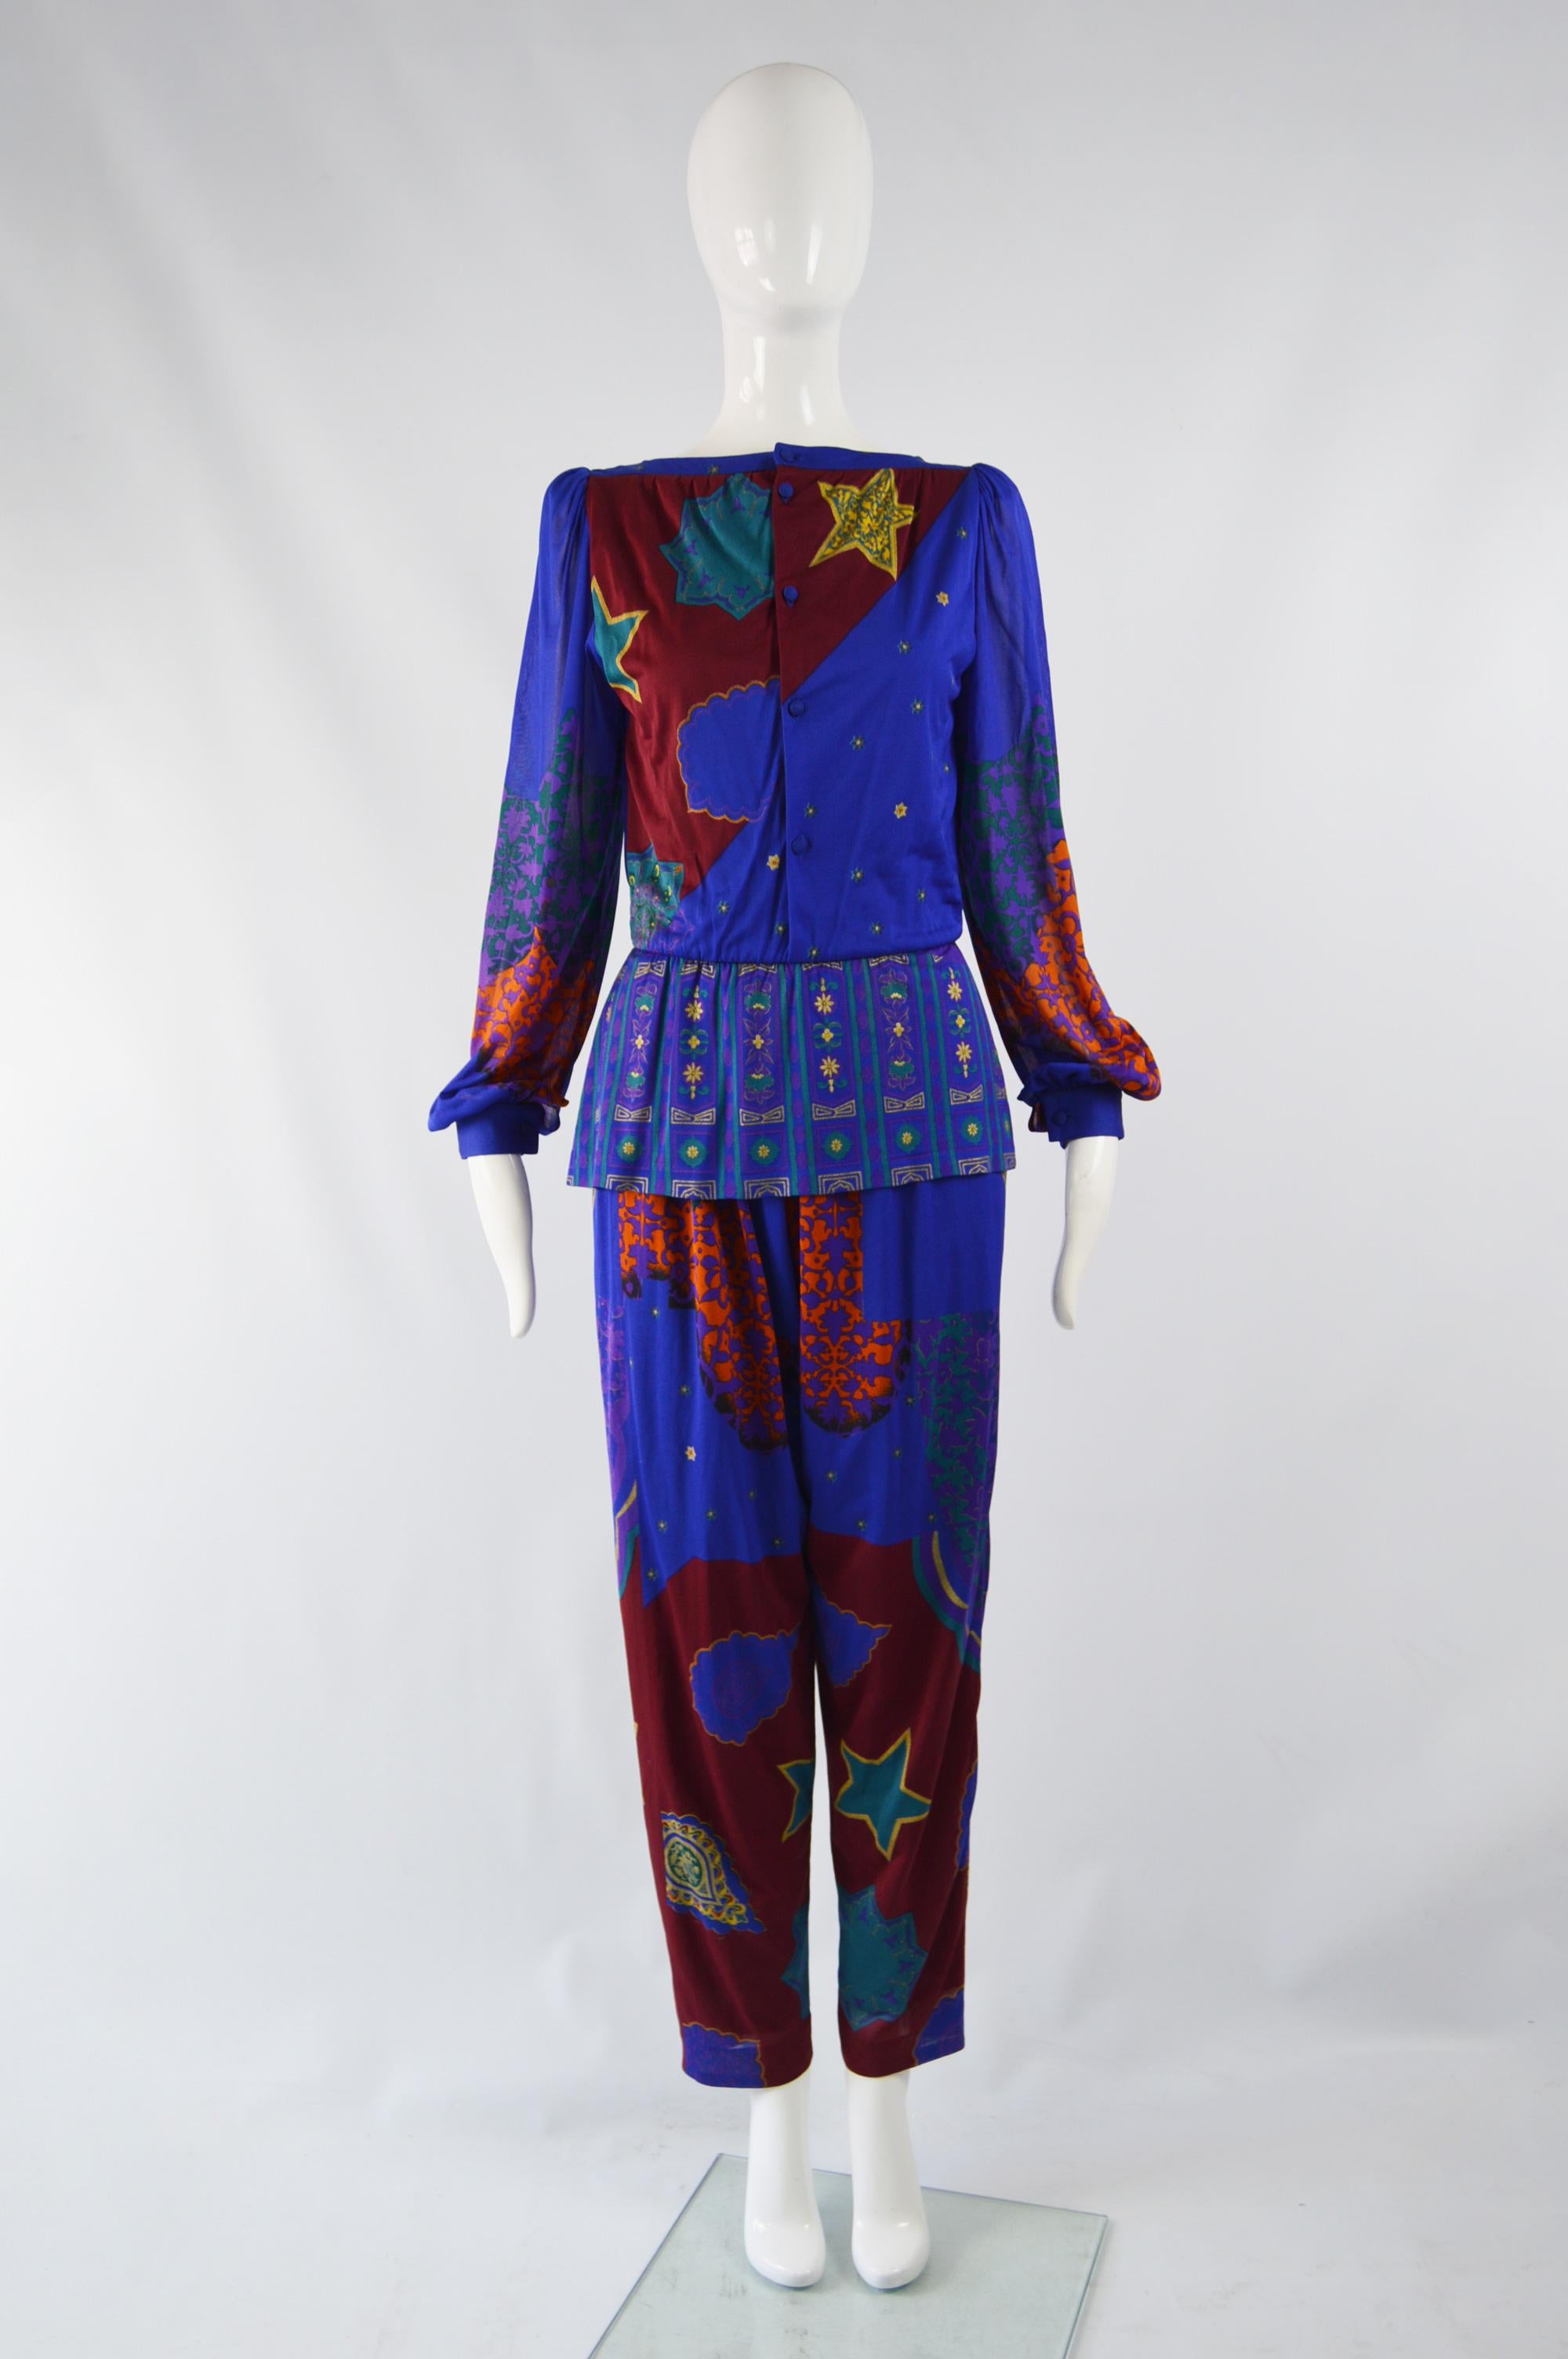 A fabulous harem style jumpsuit from the 80s by quality Italian label, Fiorella. In a blue patterned fabric with a boat neck, long bishop sleeves and a peplum that gives a Paul Poiret inspired look. 

Size: Unlabelled; fits roughly like a modern